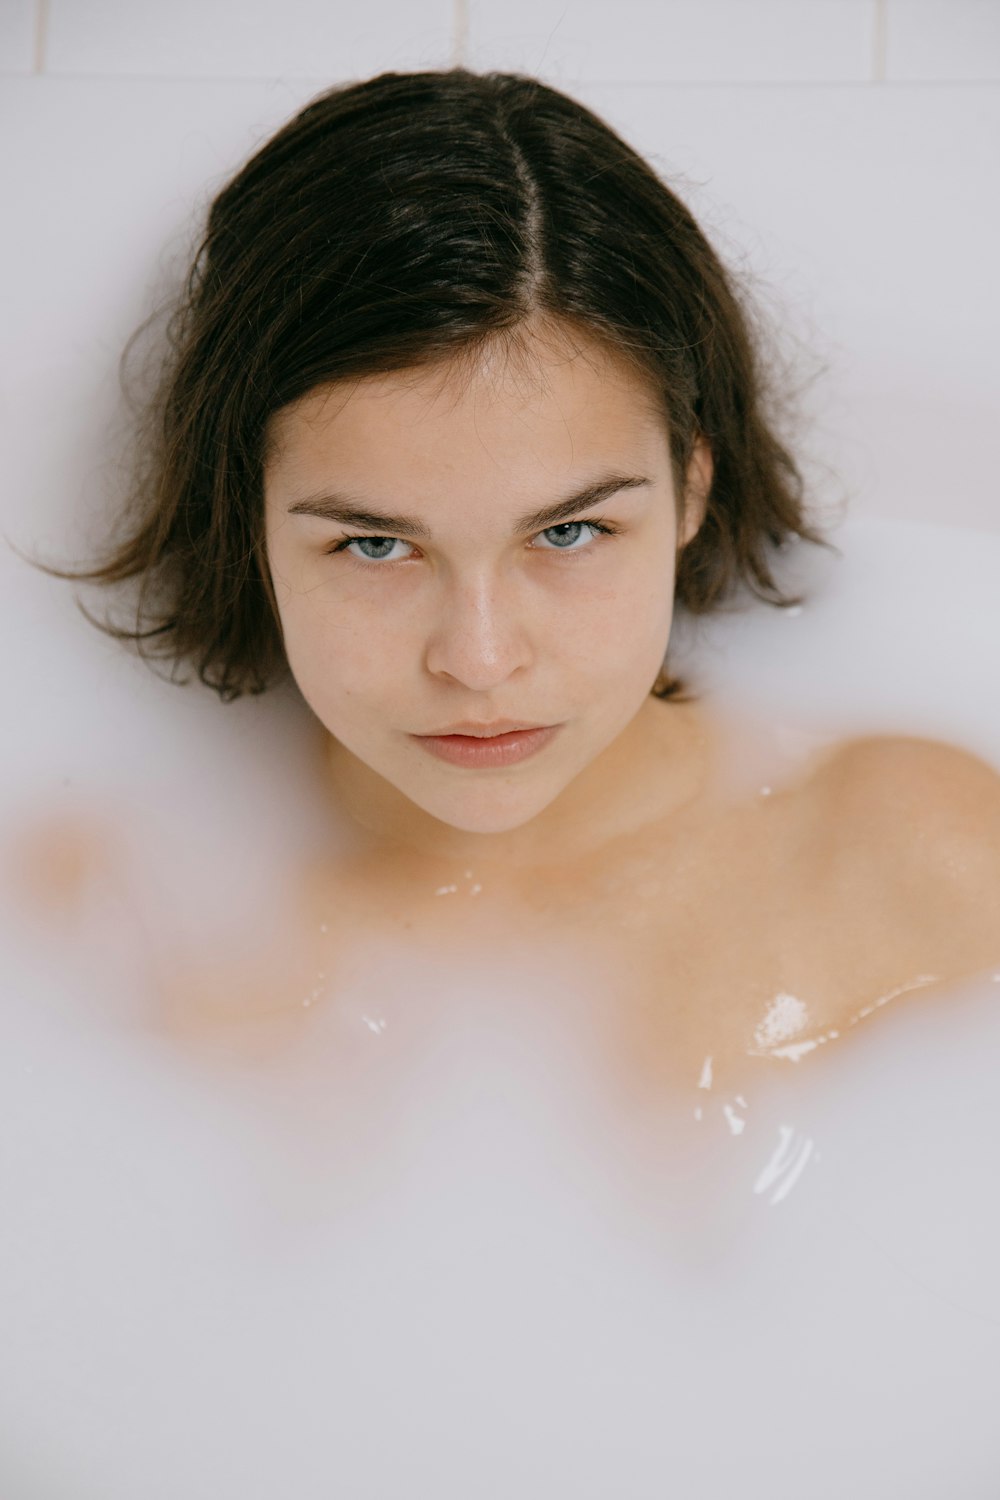 woman in bathtub with water